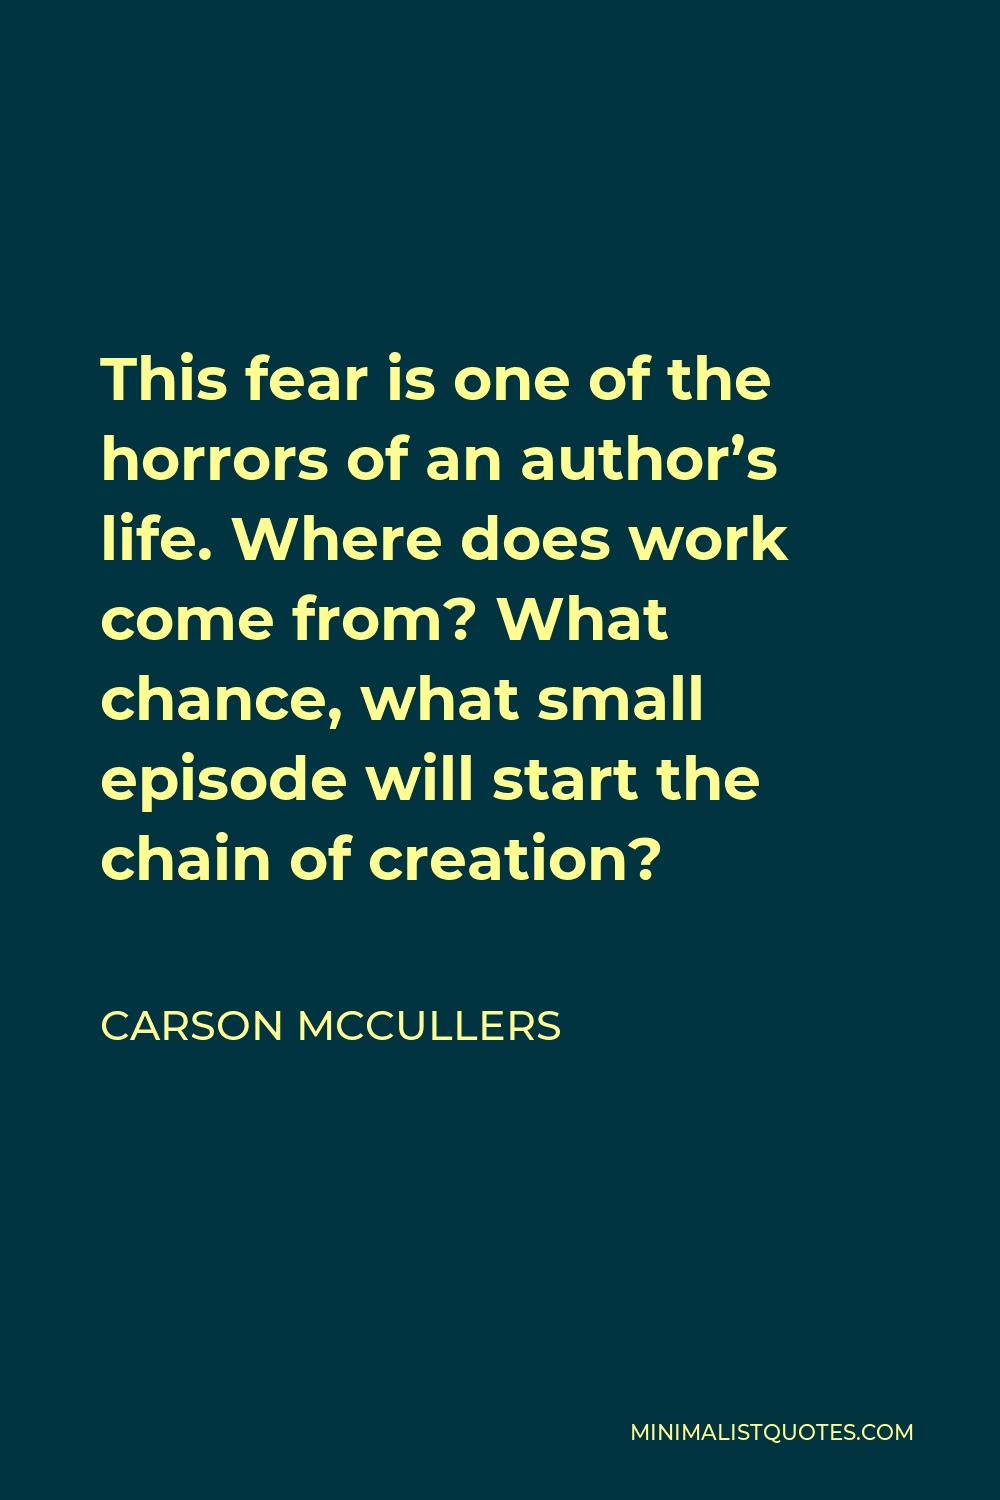 Carson McCullers Quote - This fear is one of the horrors of an author’s life. Where does work come from? What chance, what small episode will start the chain of creation?